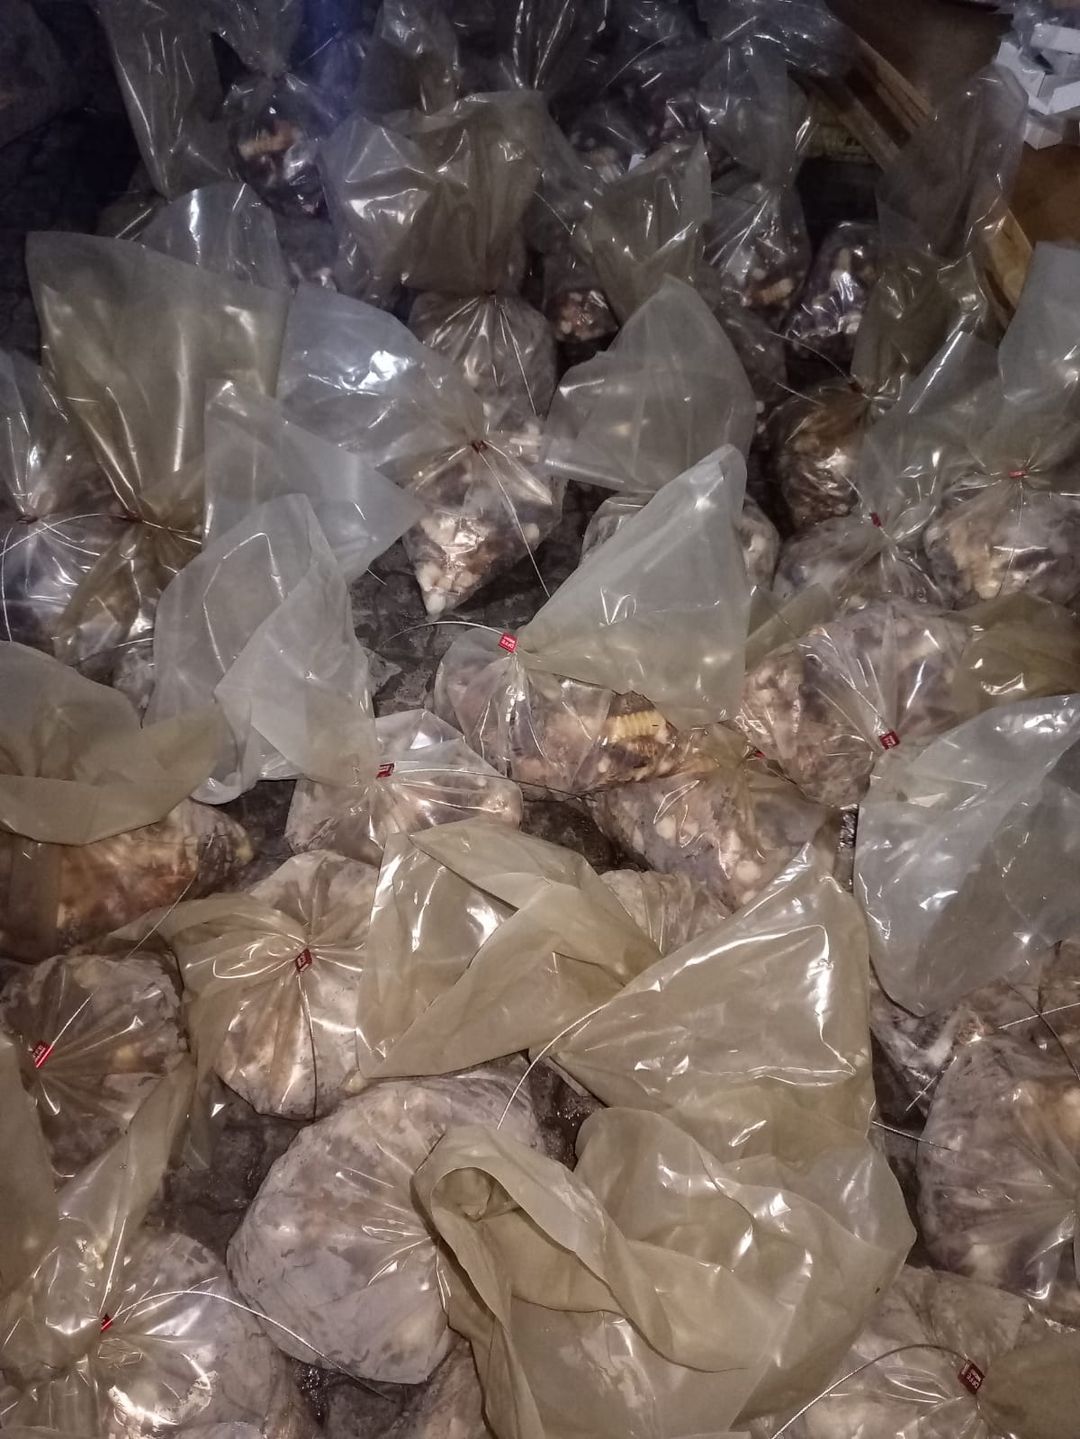 Suspect to appear in court for the possession of crayfish worth R500 000